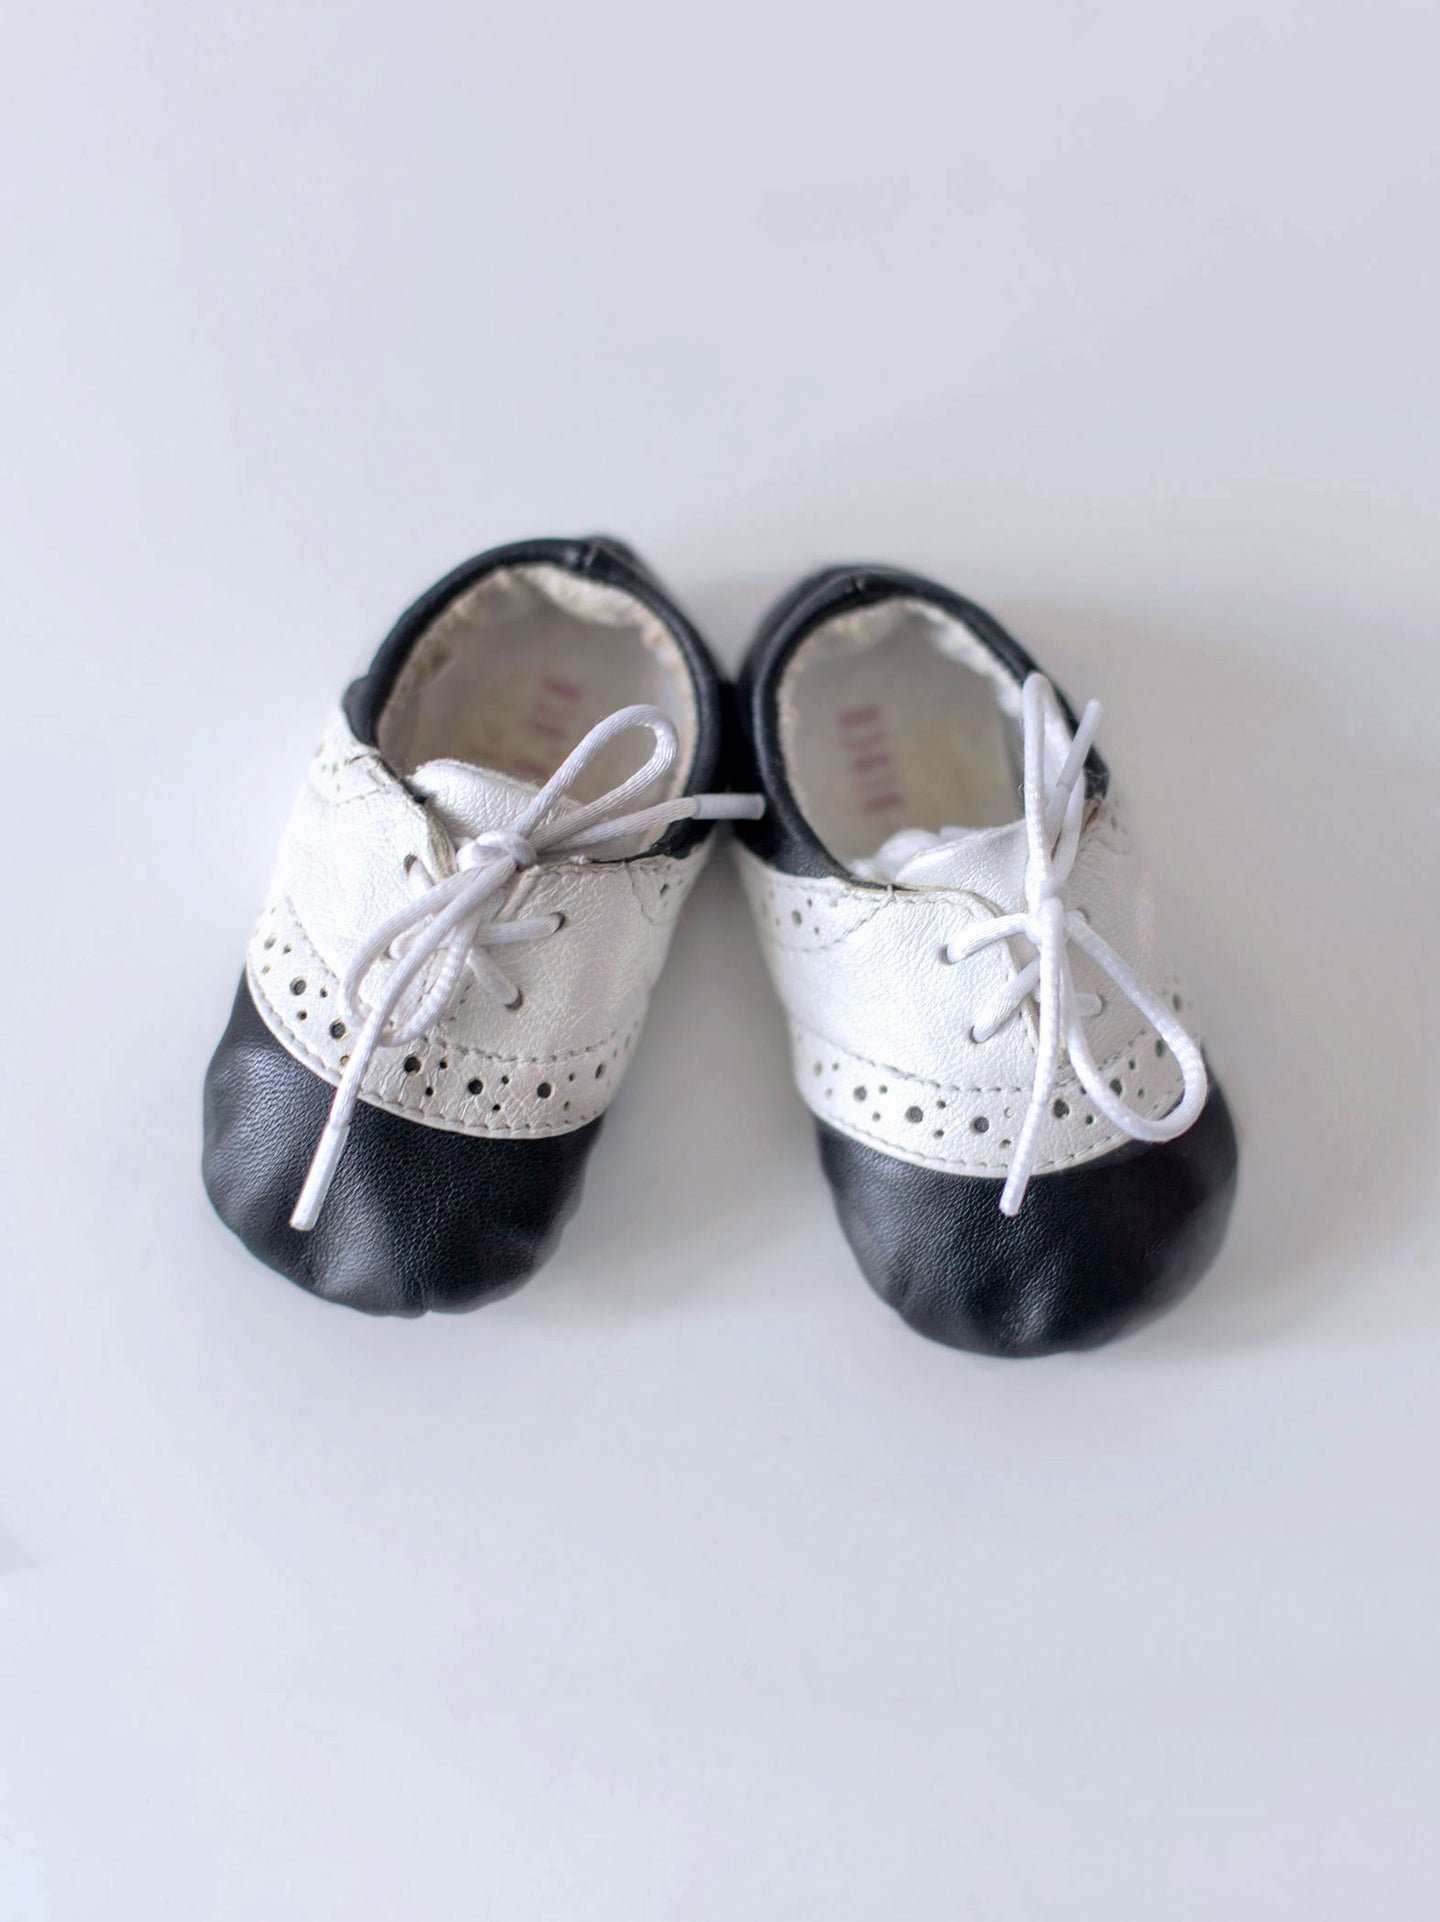 [US1] Baby Bloch Black & White Leather Shoes in box